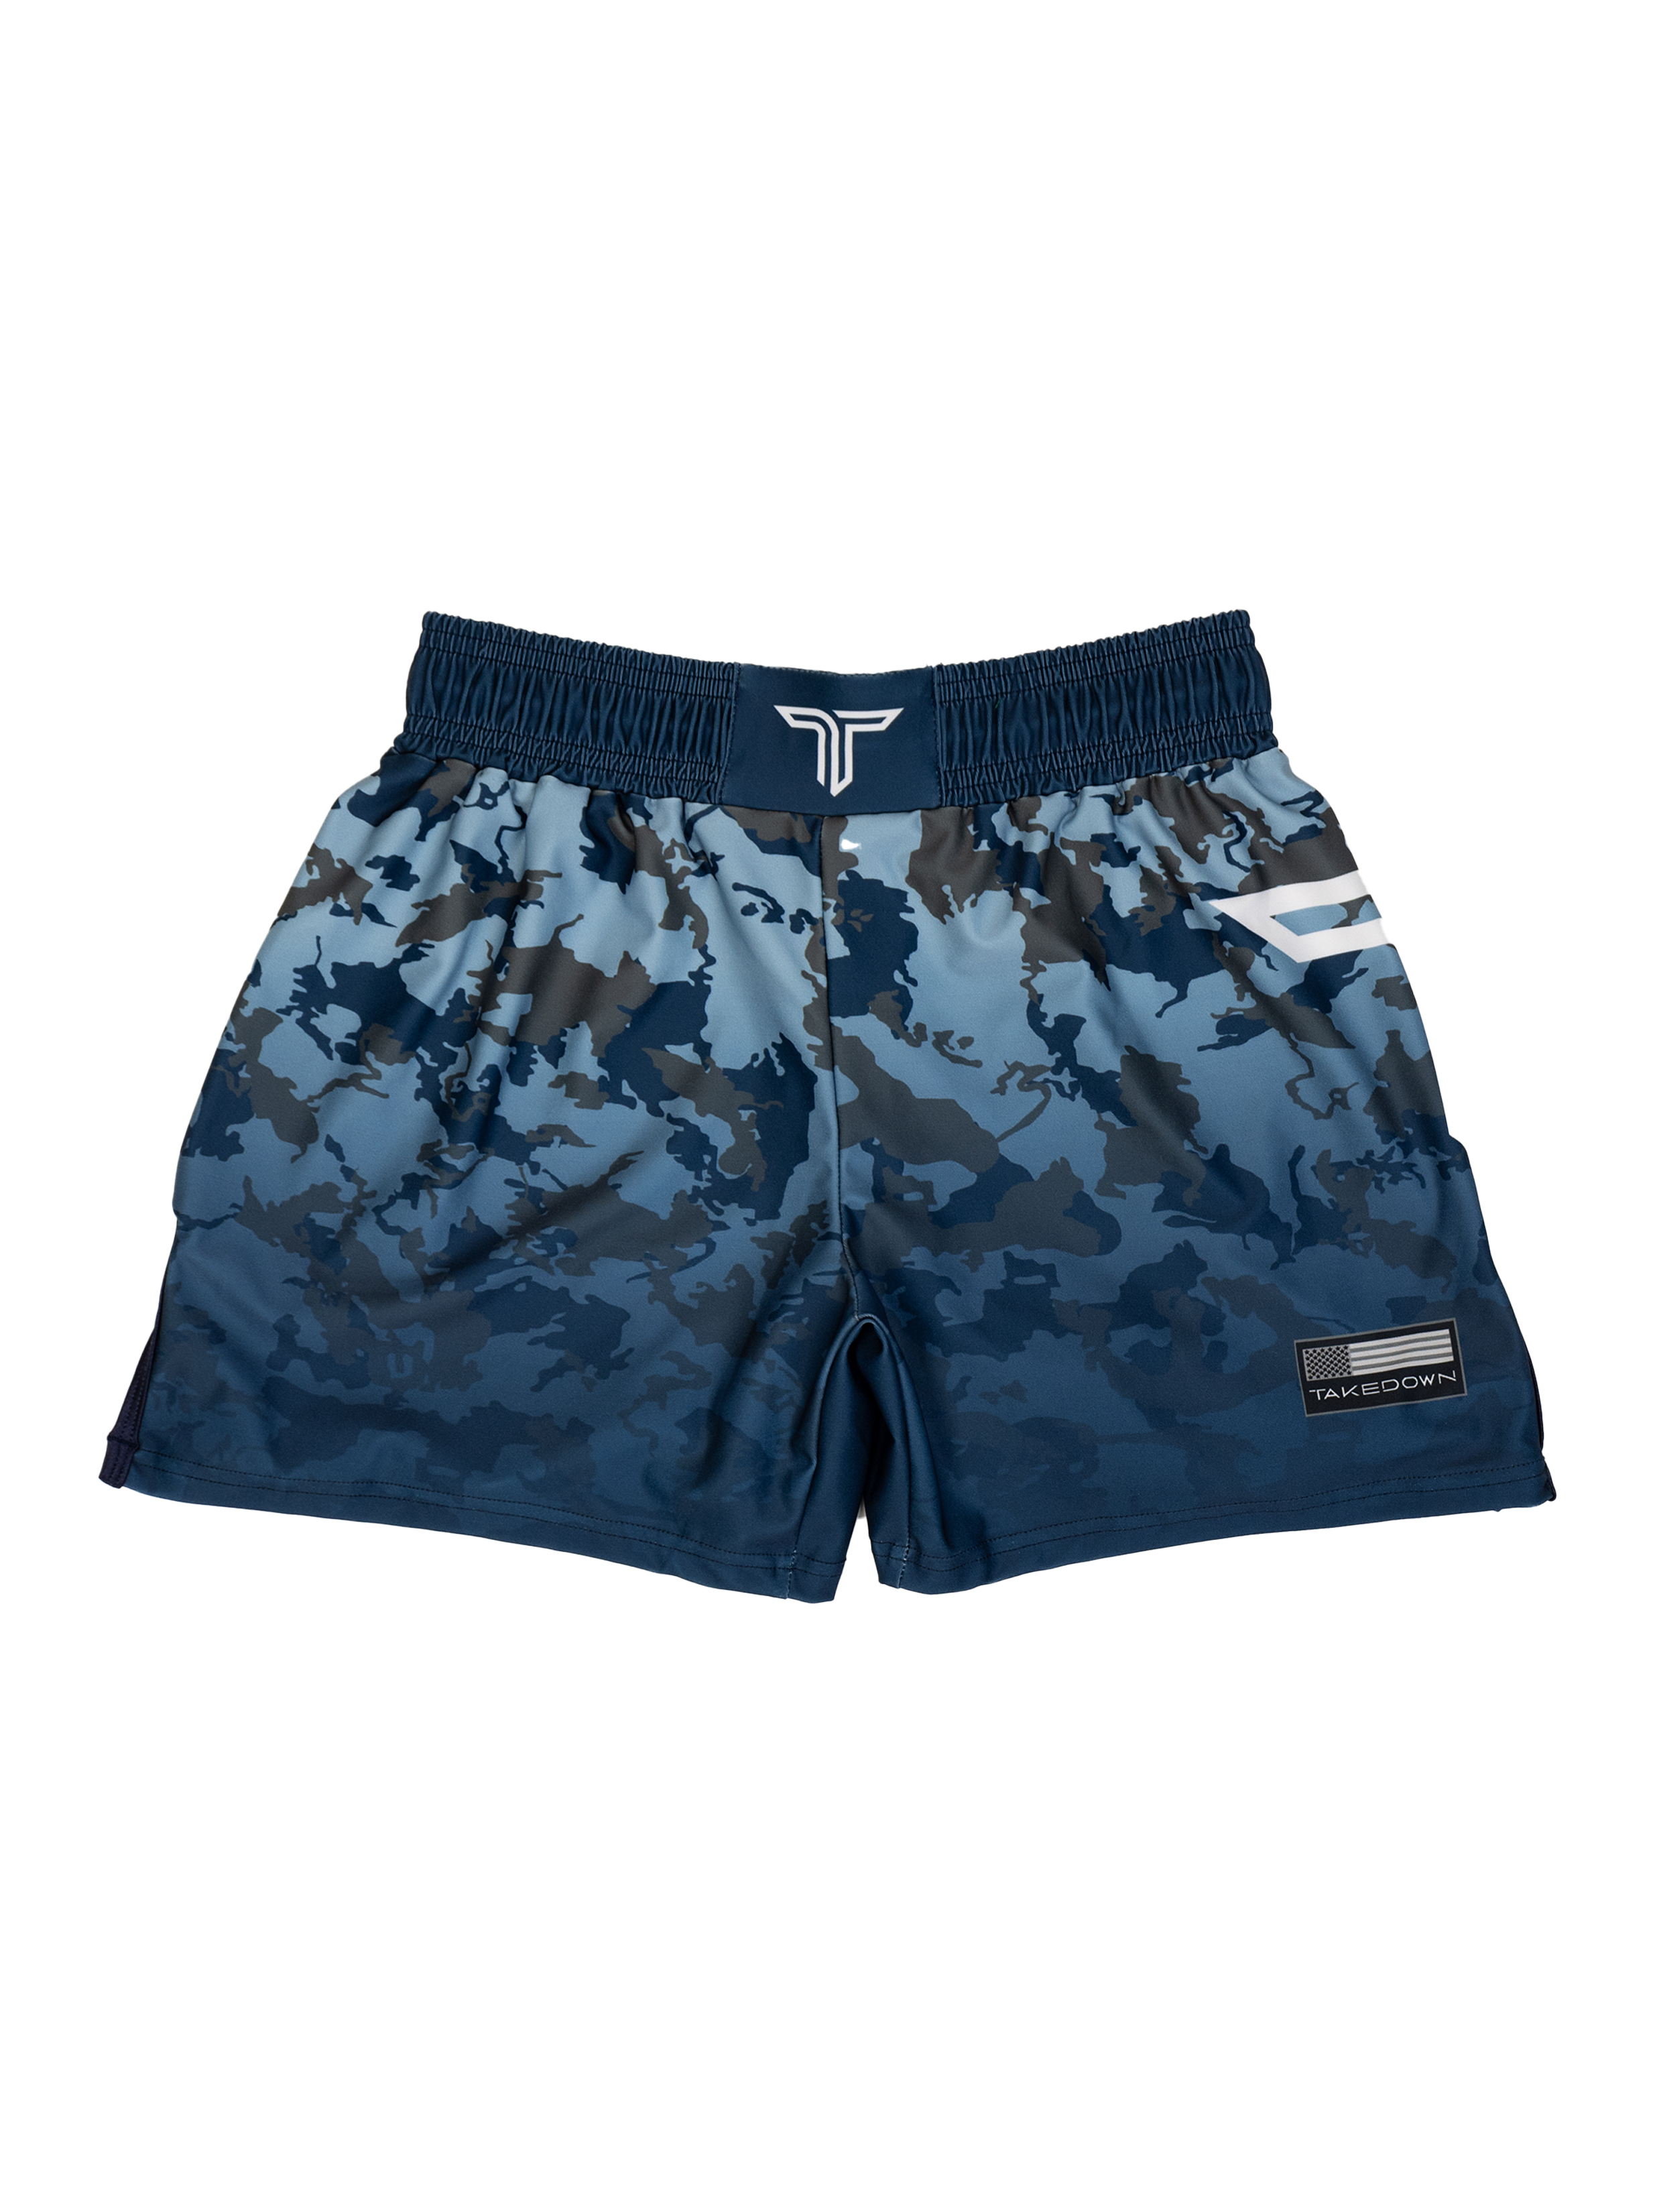 Particle Camo Fight Shorts - Ink (5